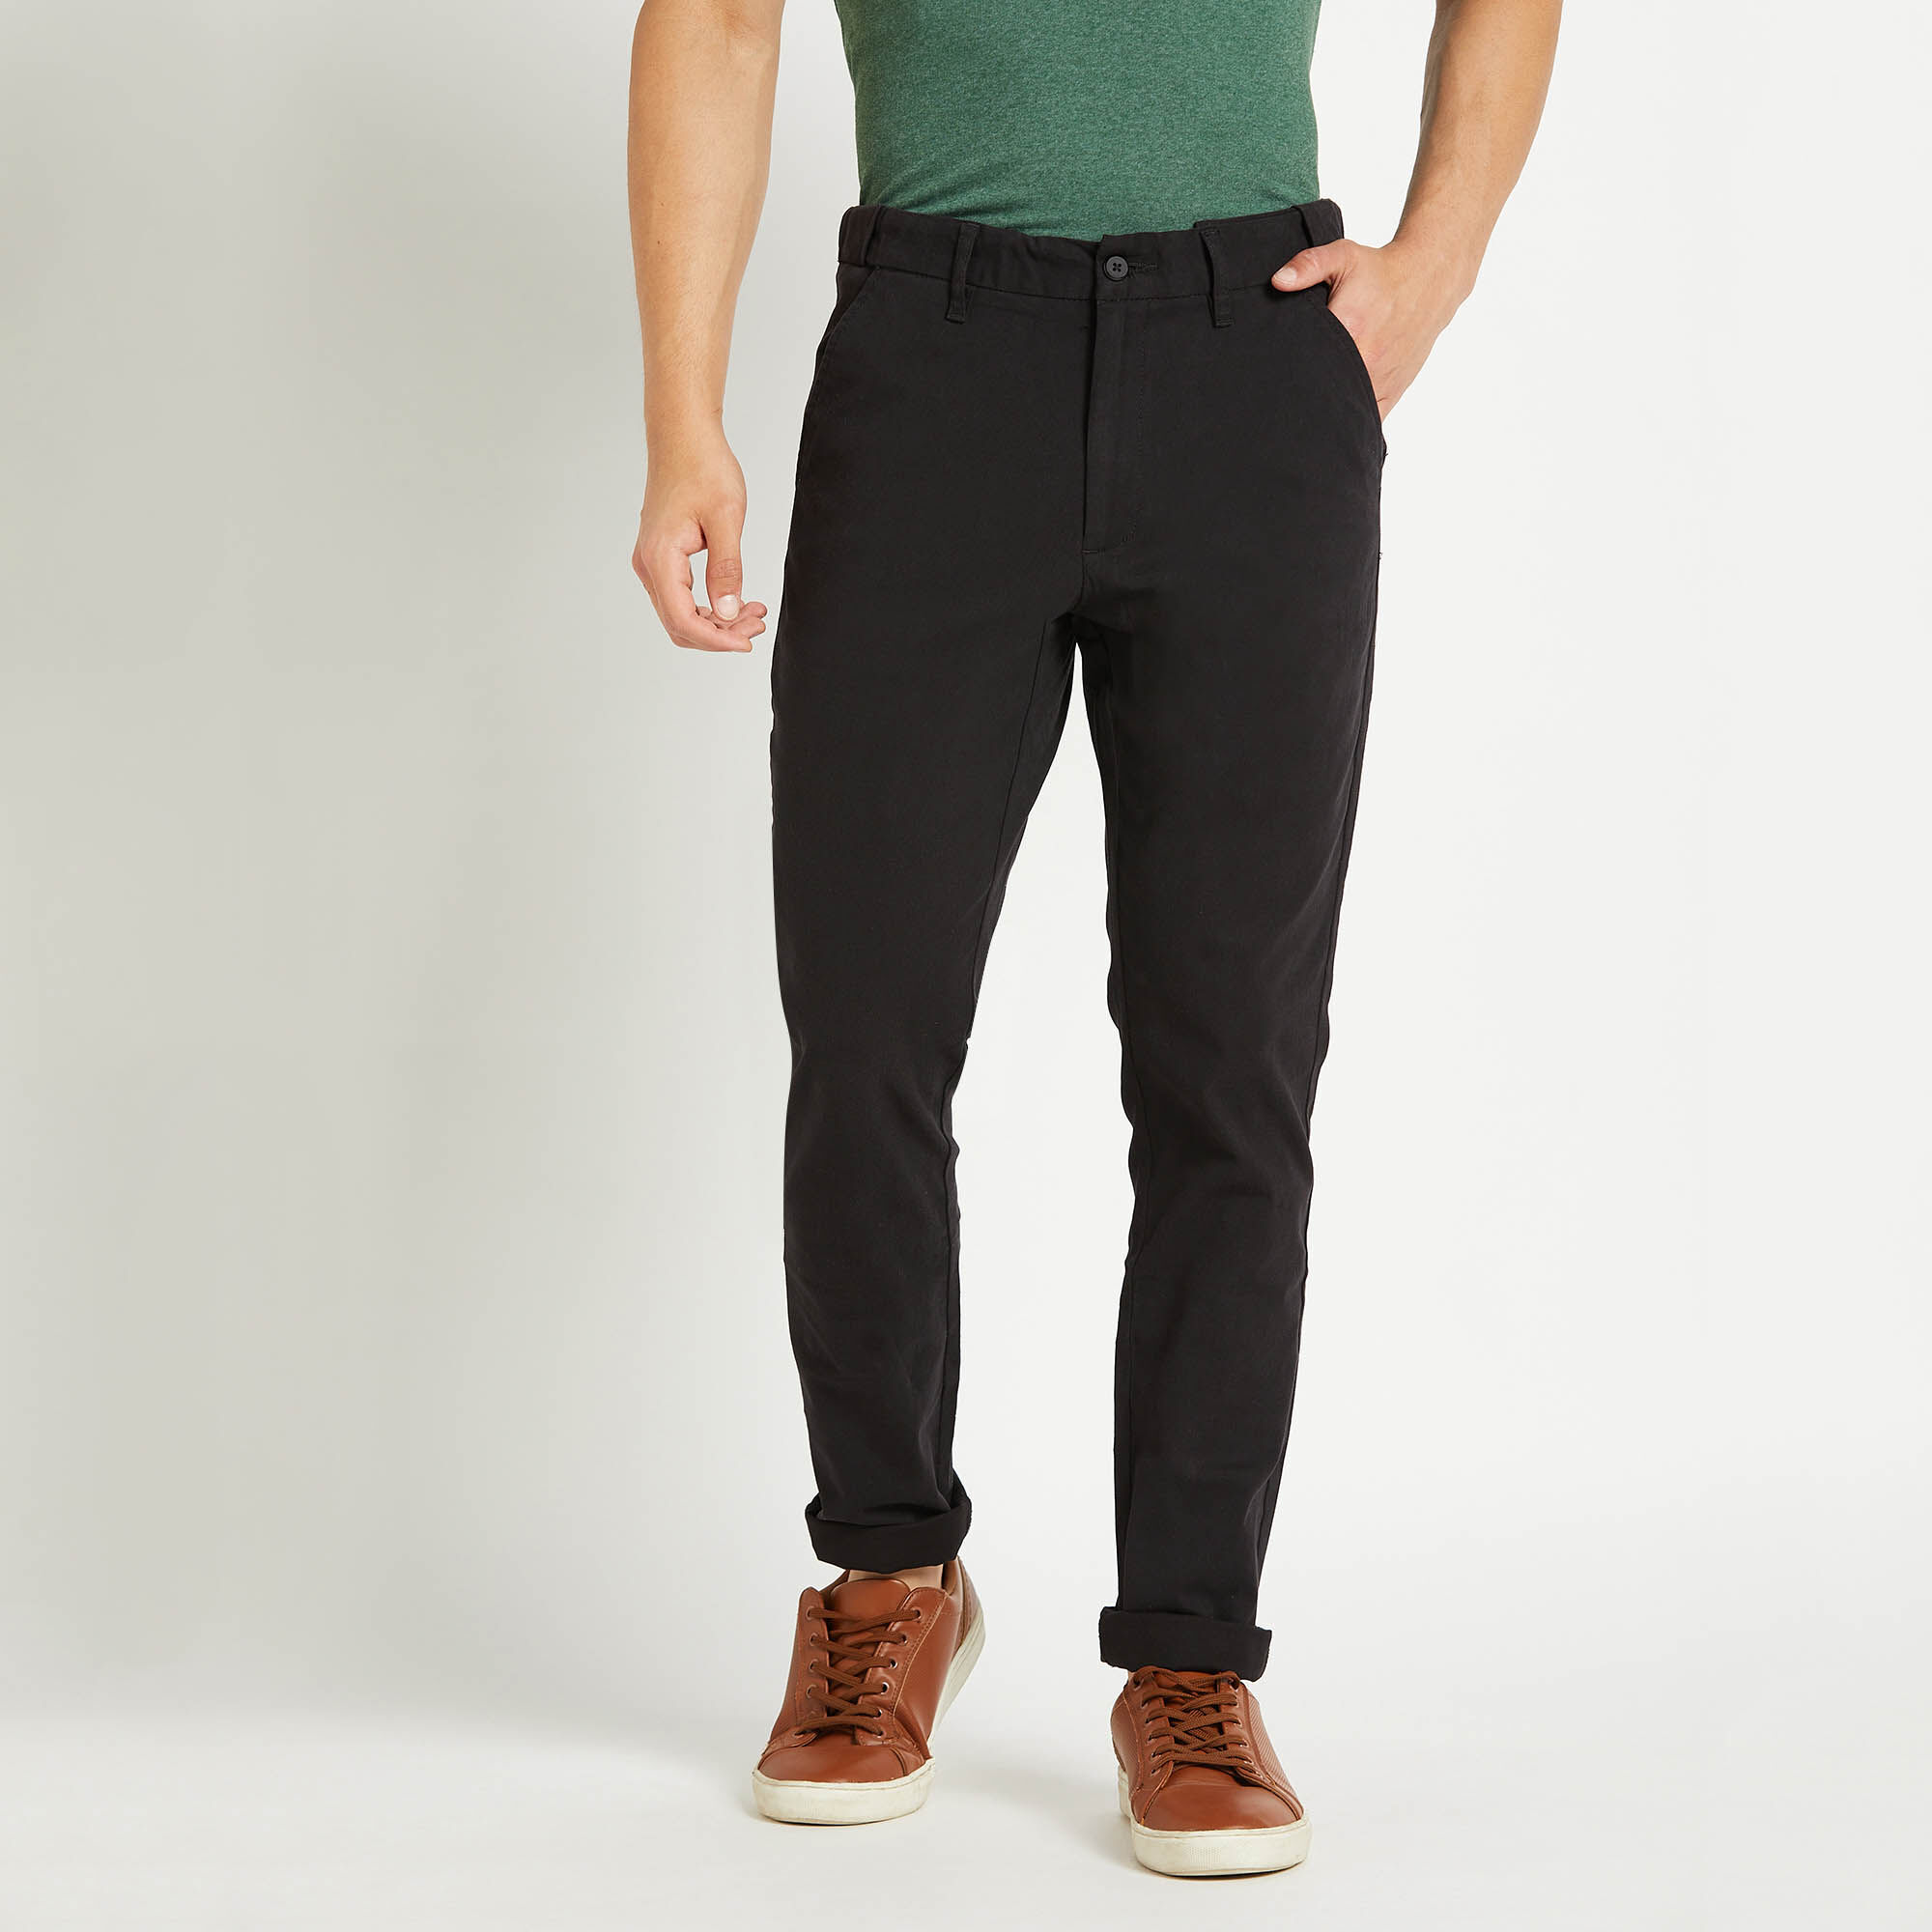 Casual Trouser For Men in Mumbai at best price by Made Smart - Justdial